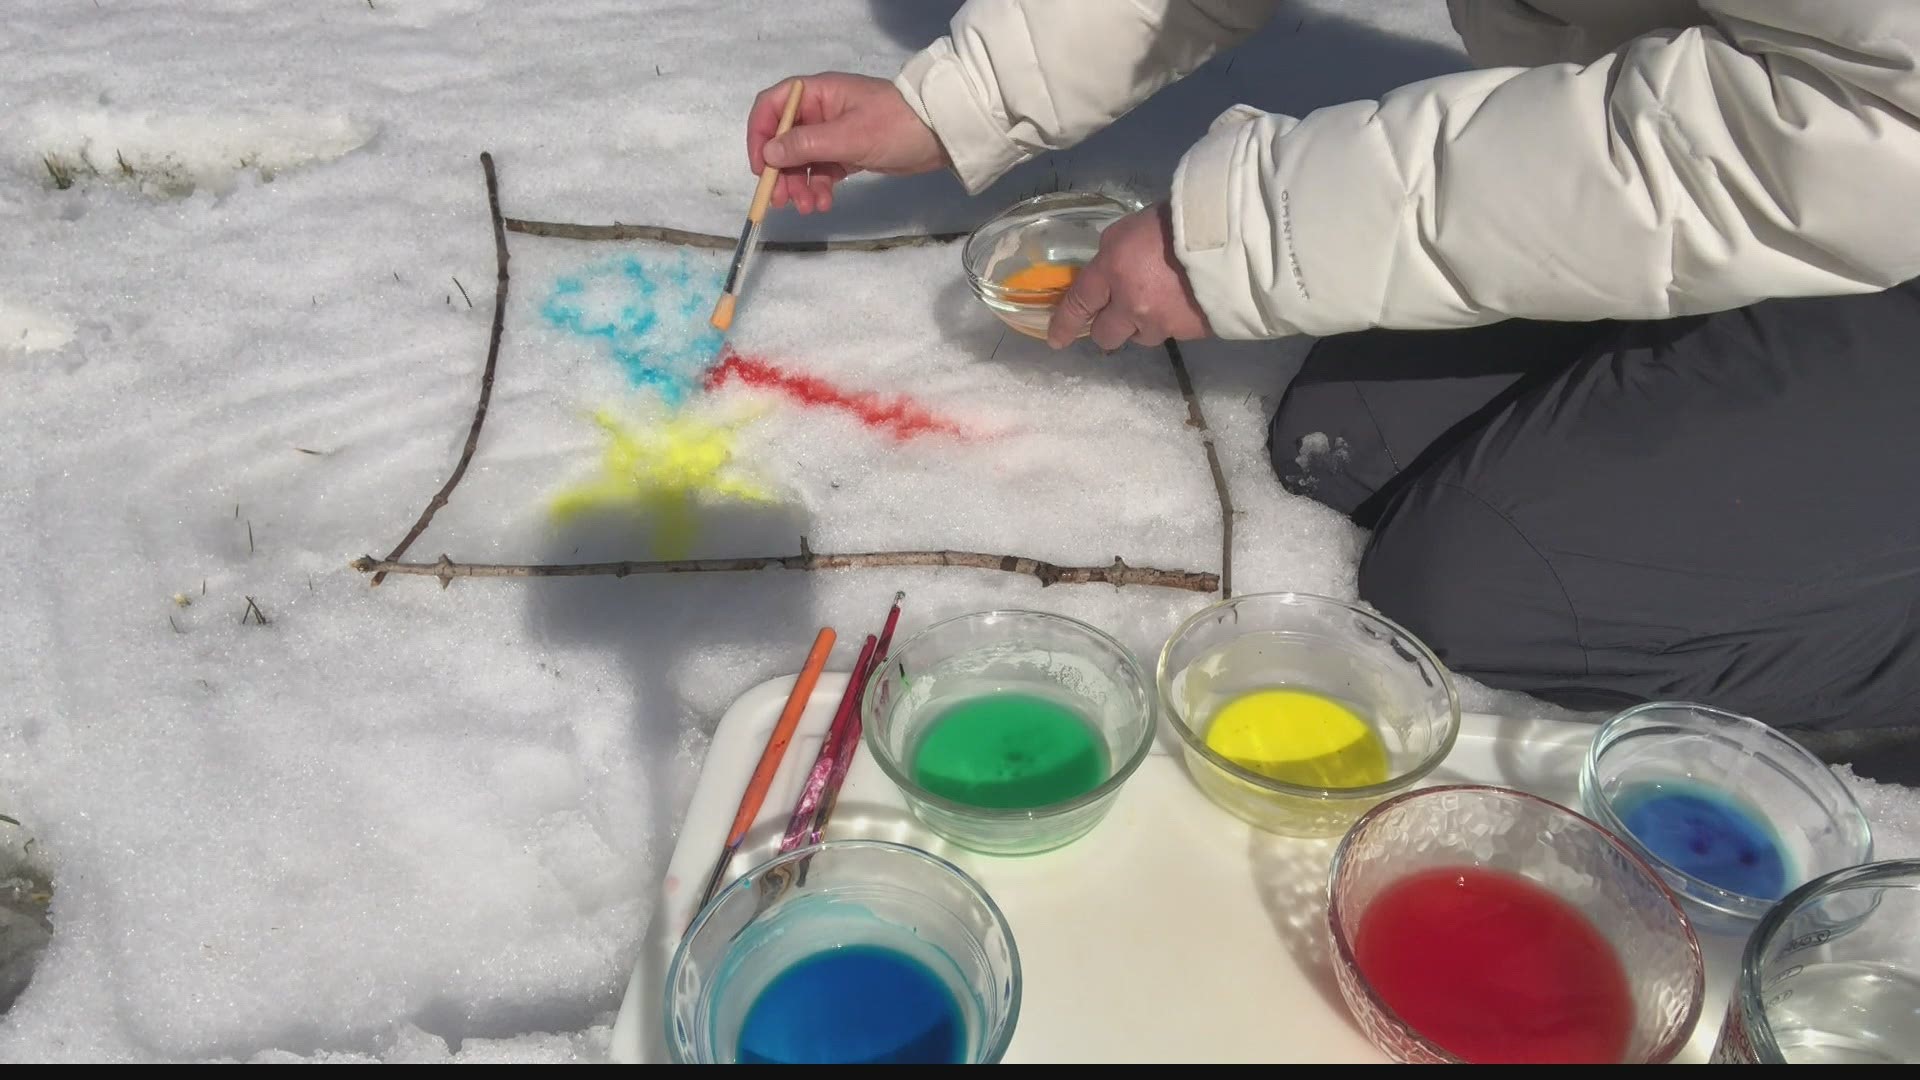 13News meteorologist Kelly Greene shares unique, fun activities to do in the snow.